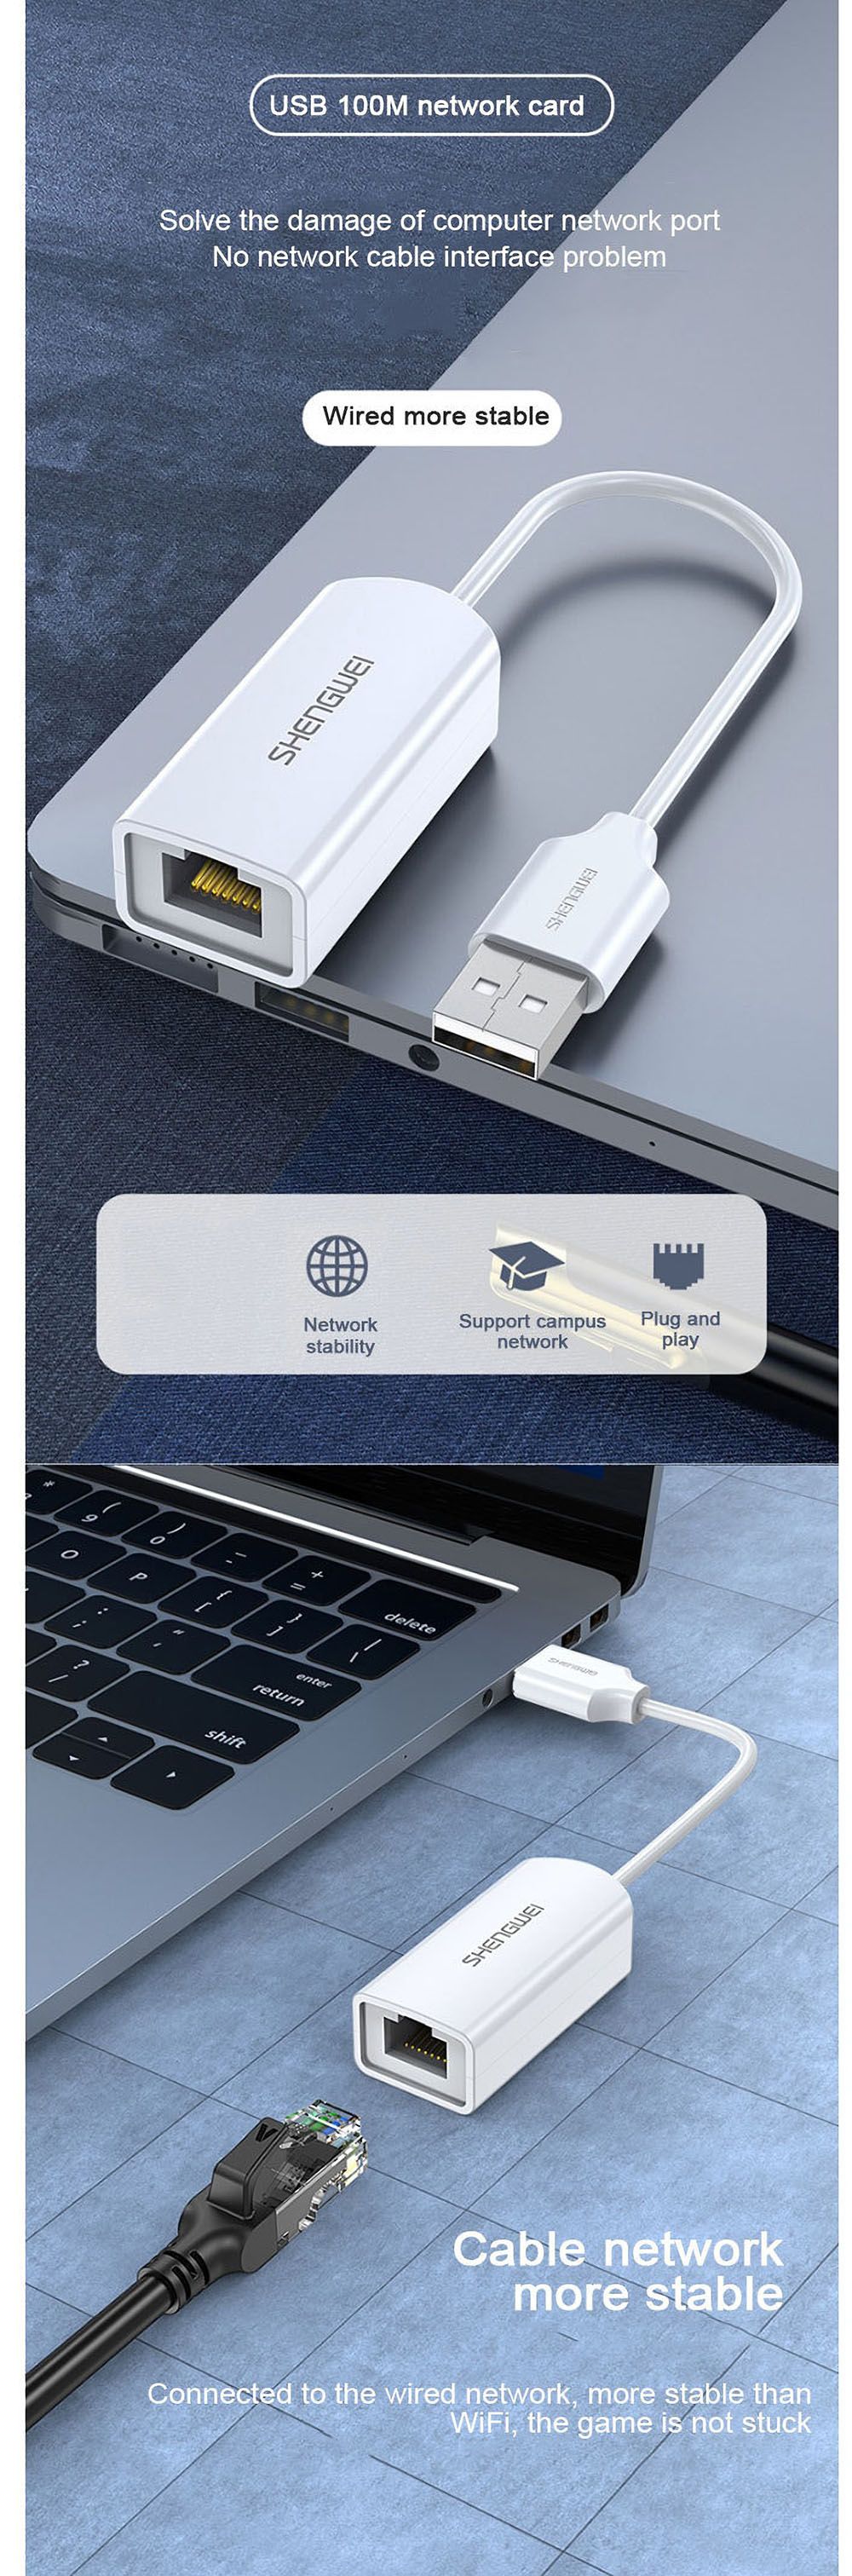 USB20-to-RJ45-Network-Cable-Converter-100M-Cable-Network-Card-Adapter-External-Adapter-Connector-for-1753557